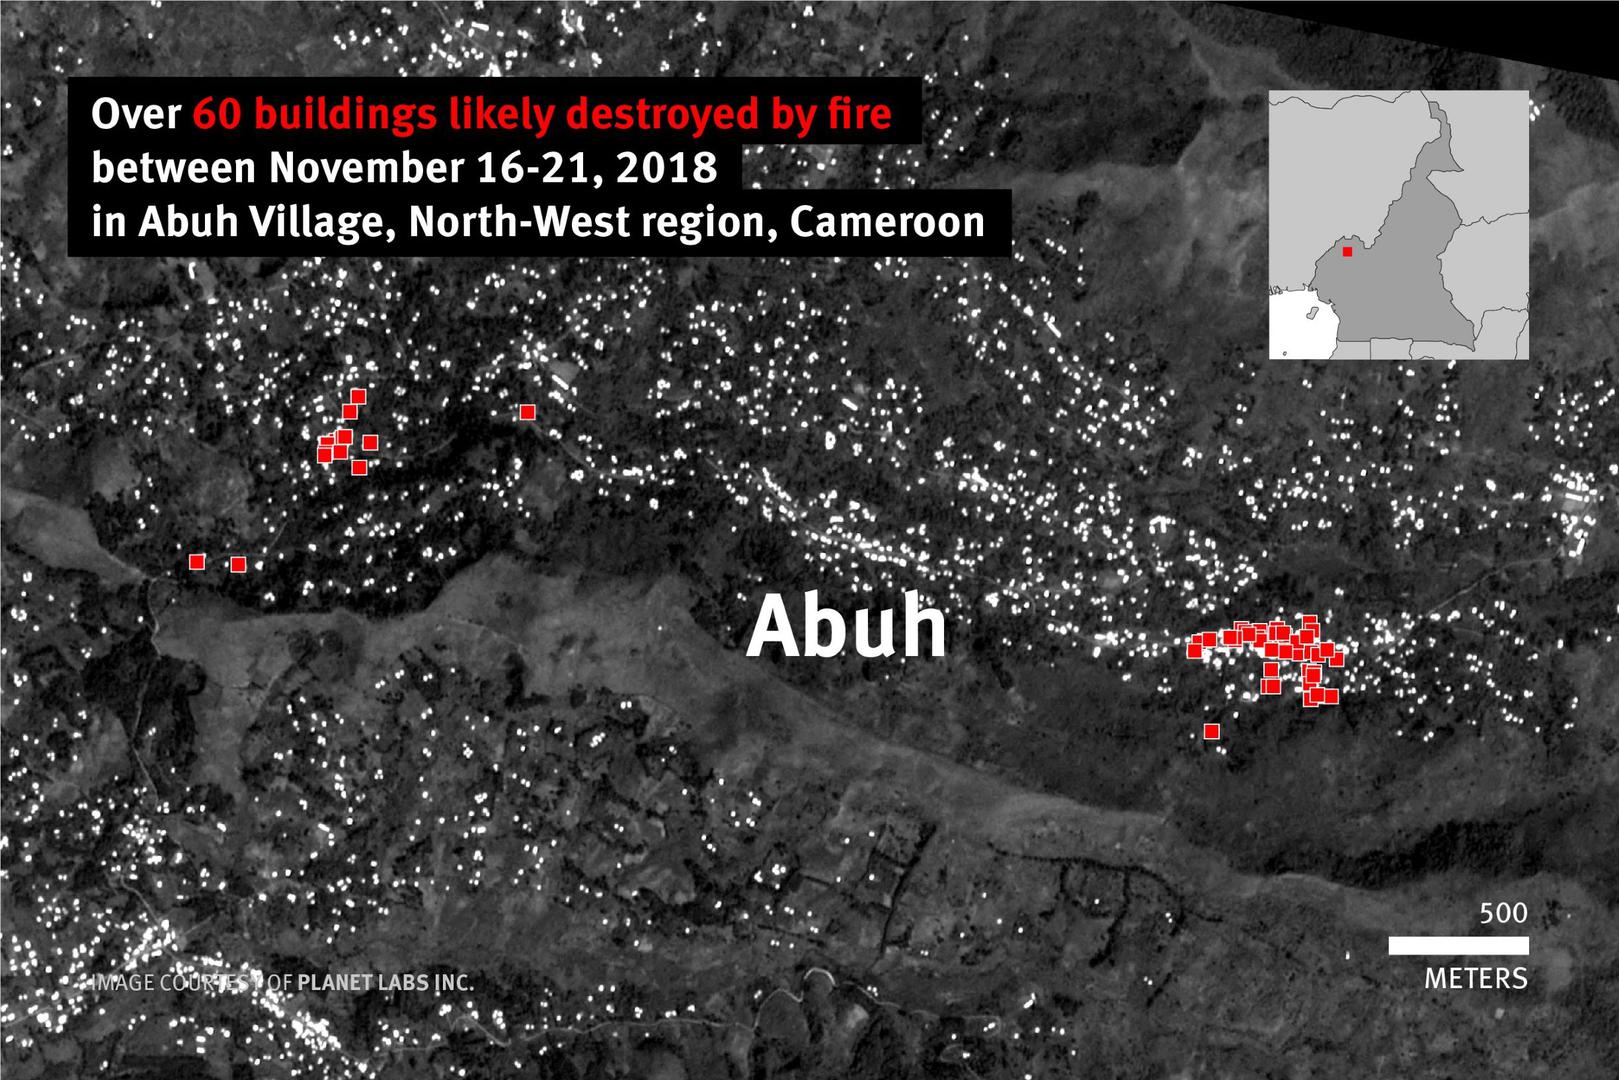 Over 60 buildings likely destroyed by fire between November 16-21, 2018 in Abuh Village, North-West region, Cameroon.